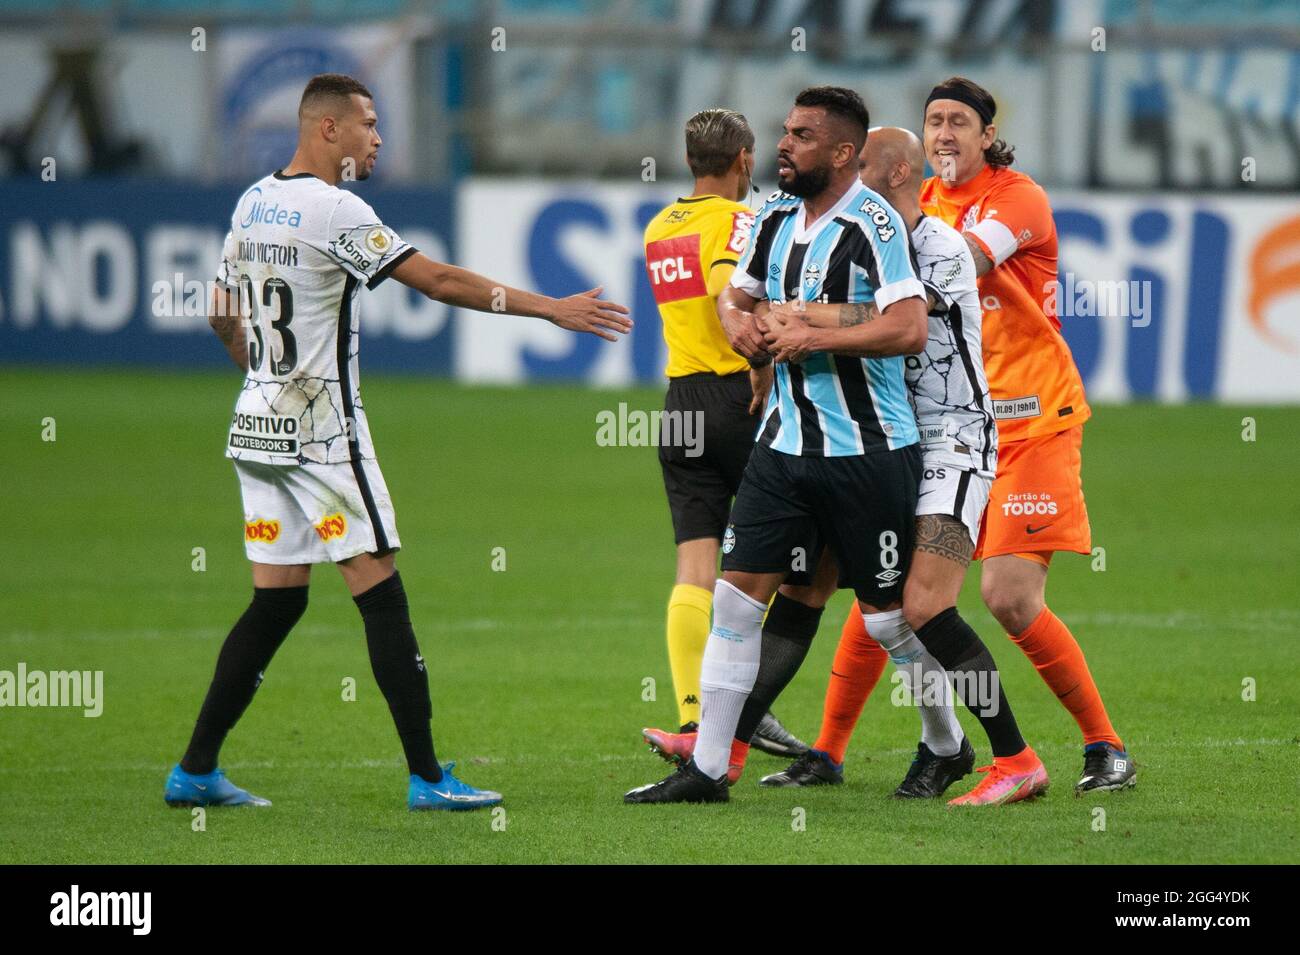 28th August 2021; Arena do Gremio, Porto Alegre, Brazil; Brazilian Serie A, Gremio versus Corinthians; Fábio Santos and Cássio from Corinthians hold back Maicon of Gr&#xea;mio after he received the red card in the 80th minute Stock Photo